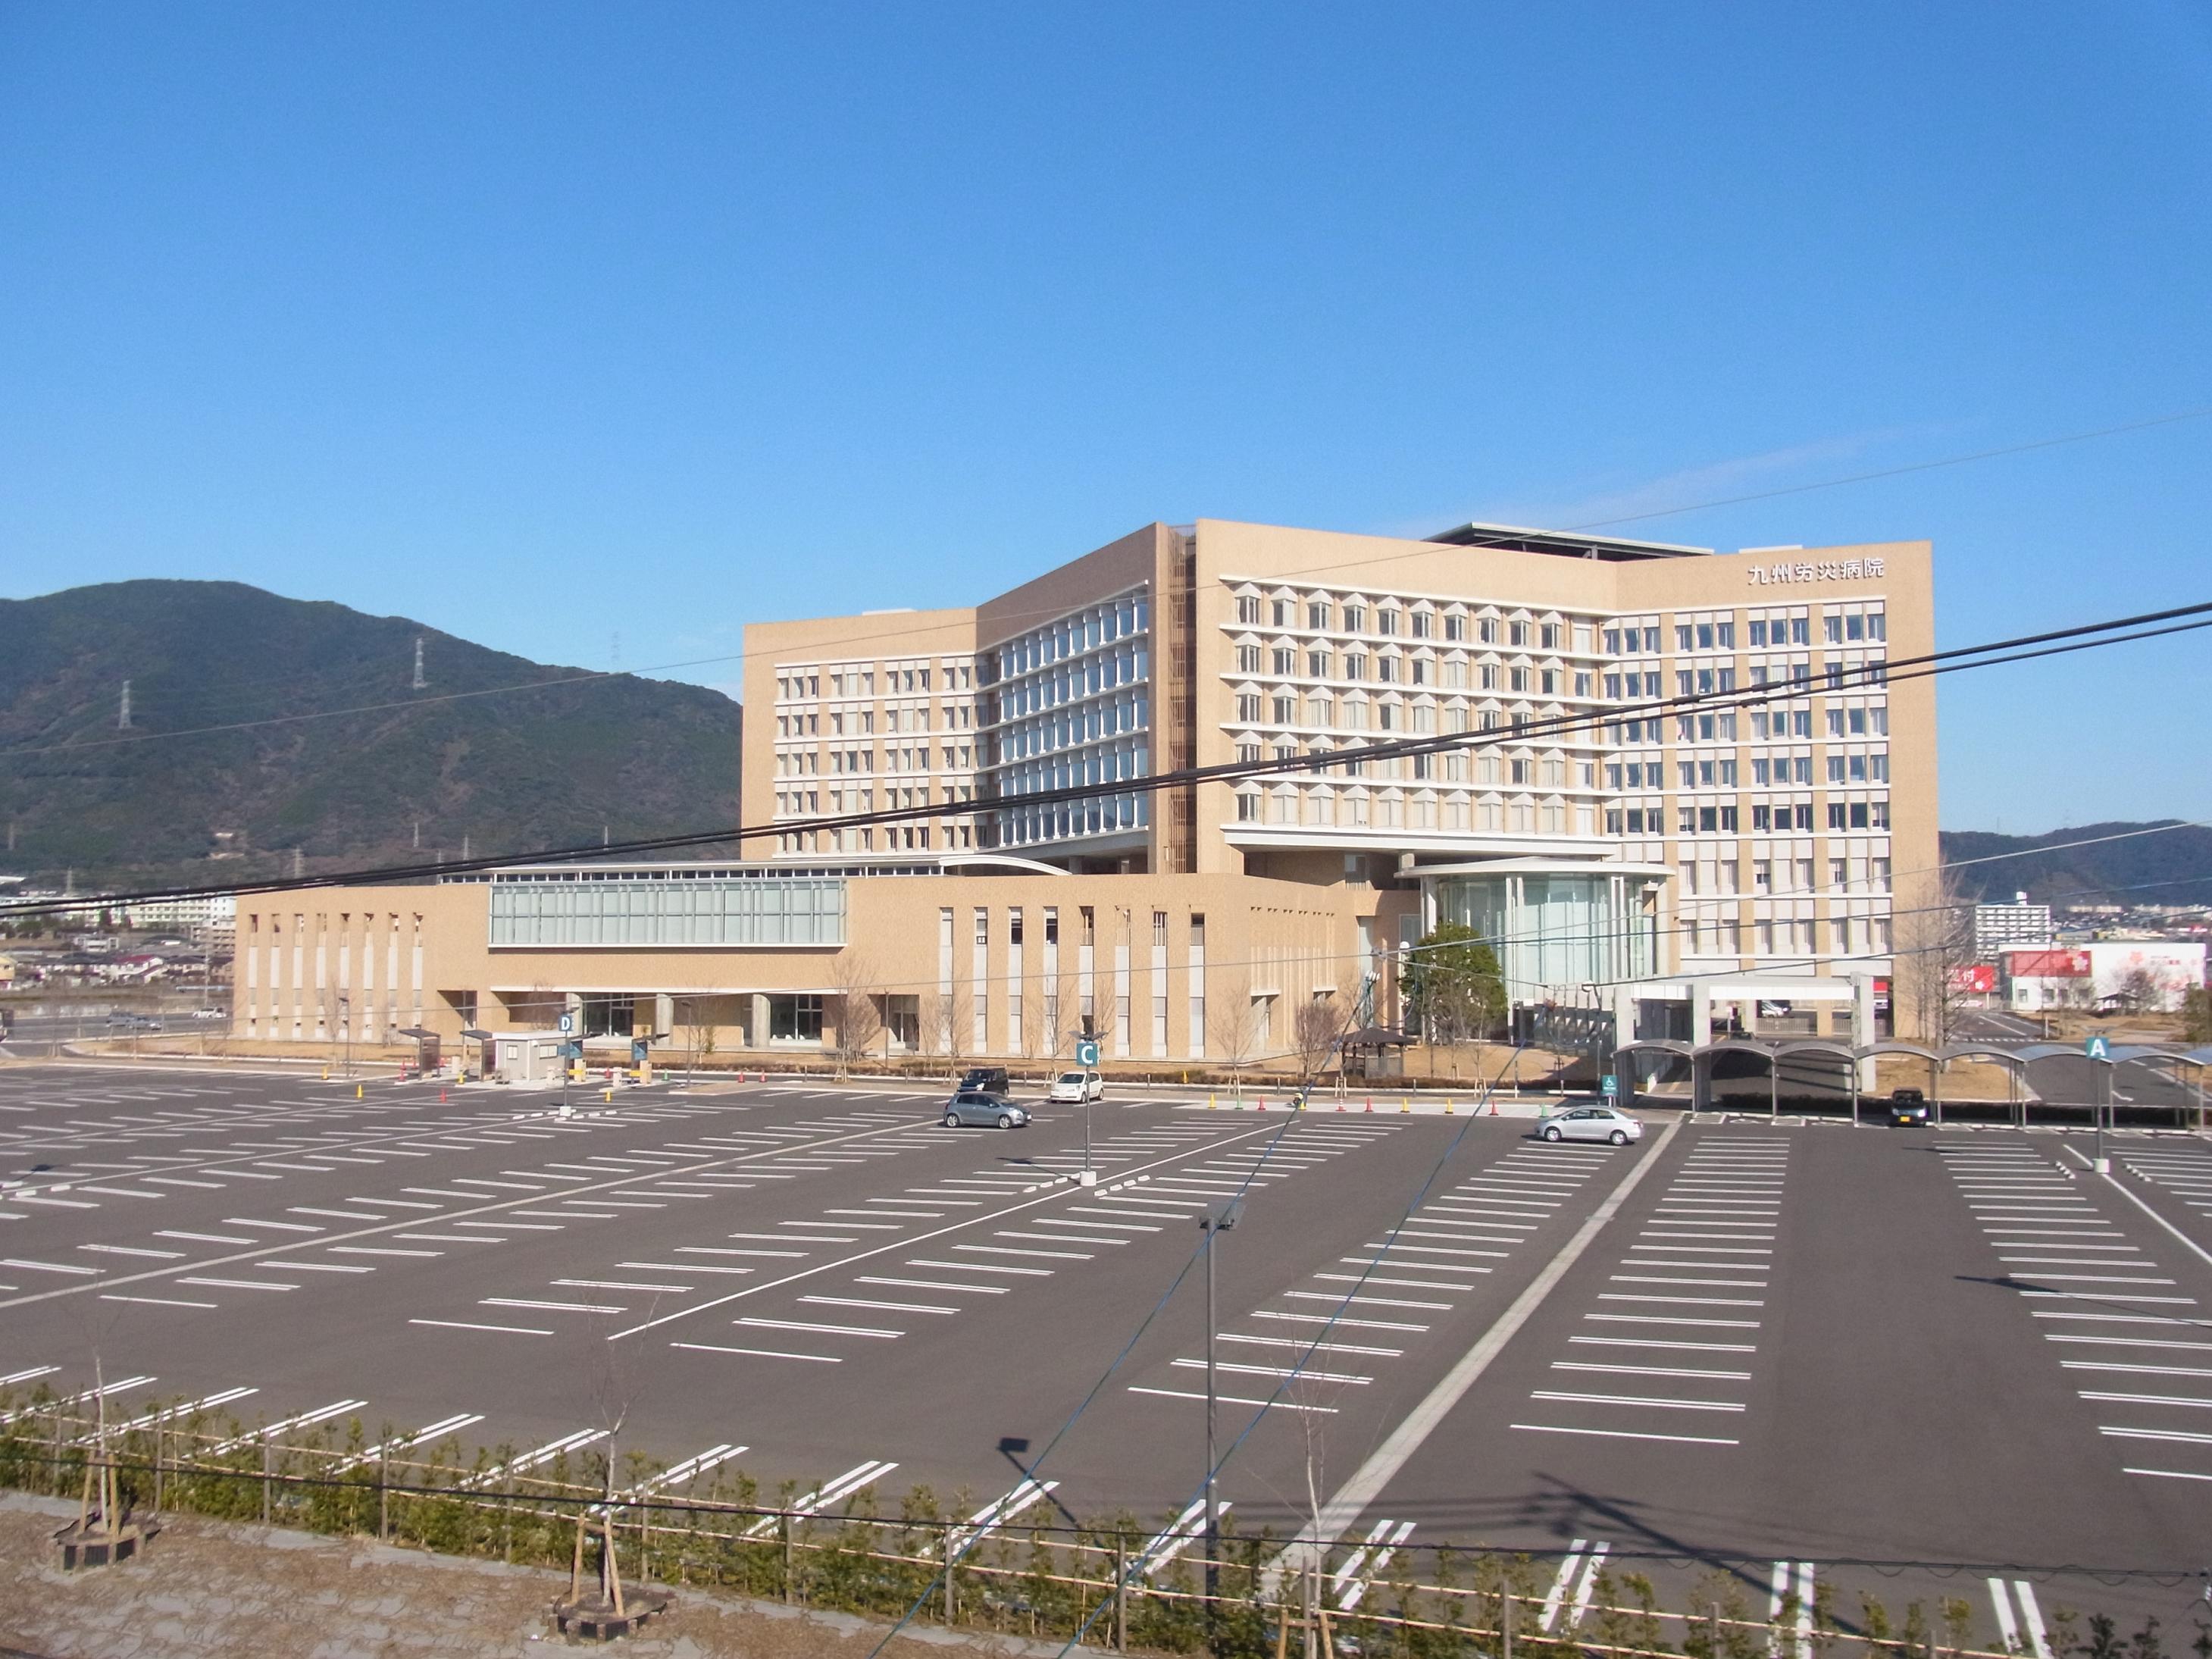 Hospital. 1402m to the National Institute of Labor Health and Welfare Organization Kyushurosaibyoin (hospital)